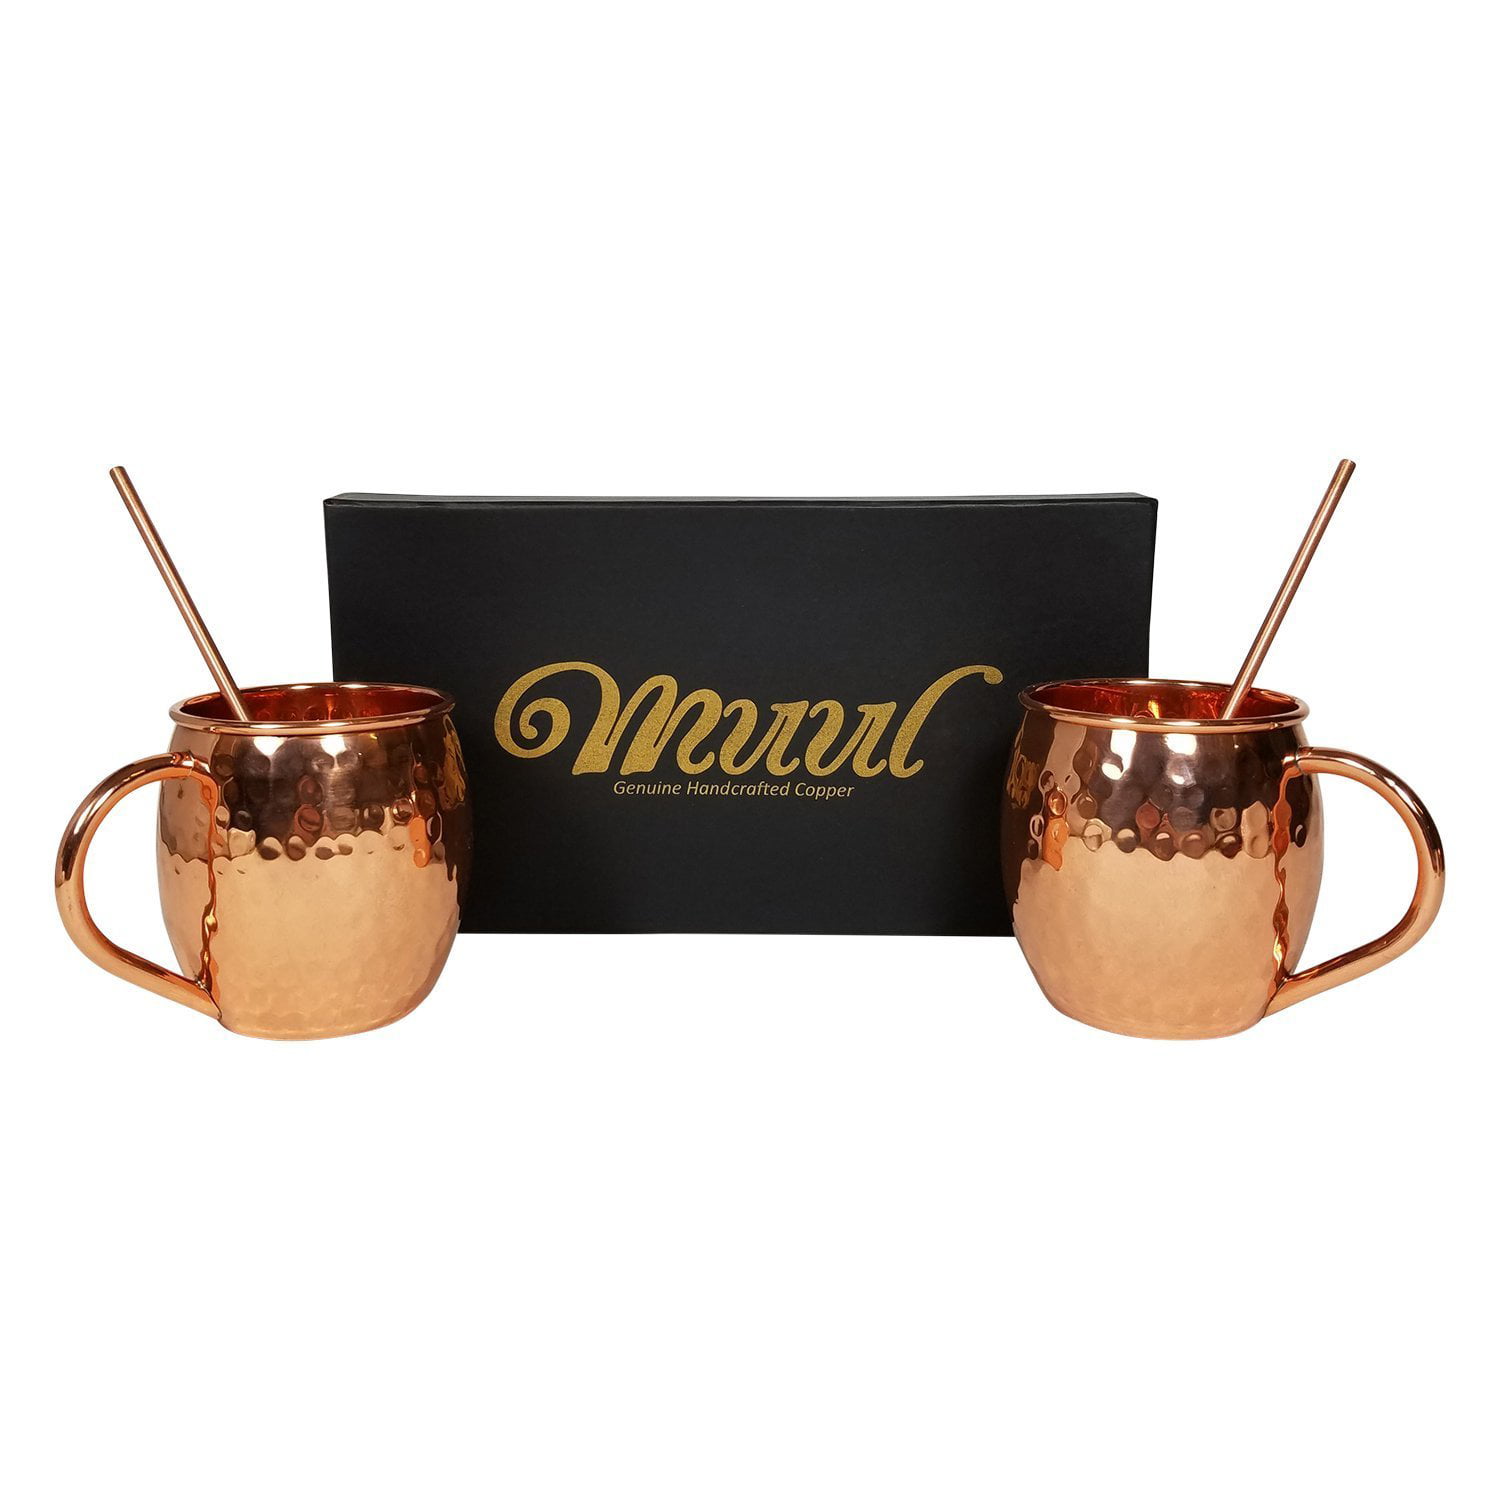 2 x Copper Mugs/ Set of 2/Moscow Mule Solid Copper Turkish Handcrafted Handmade 